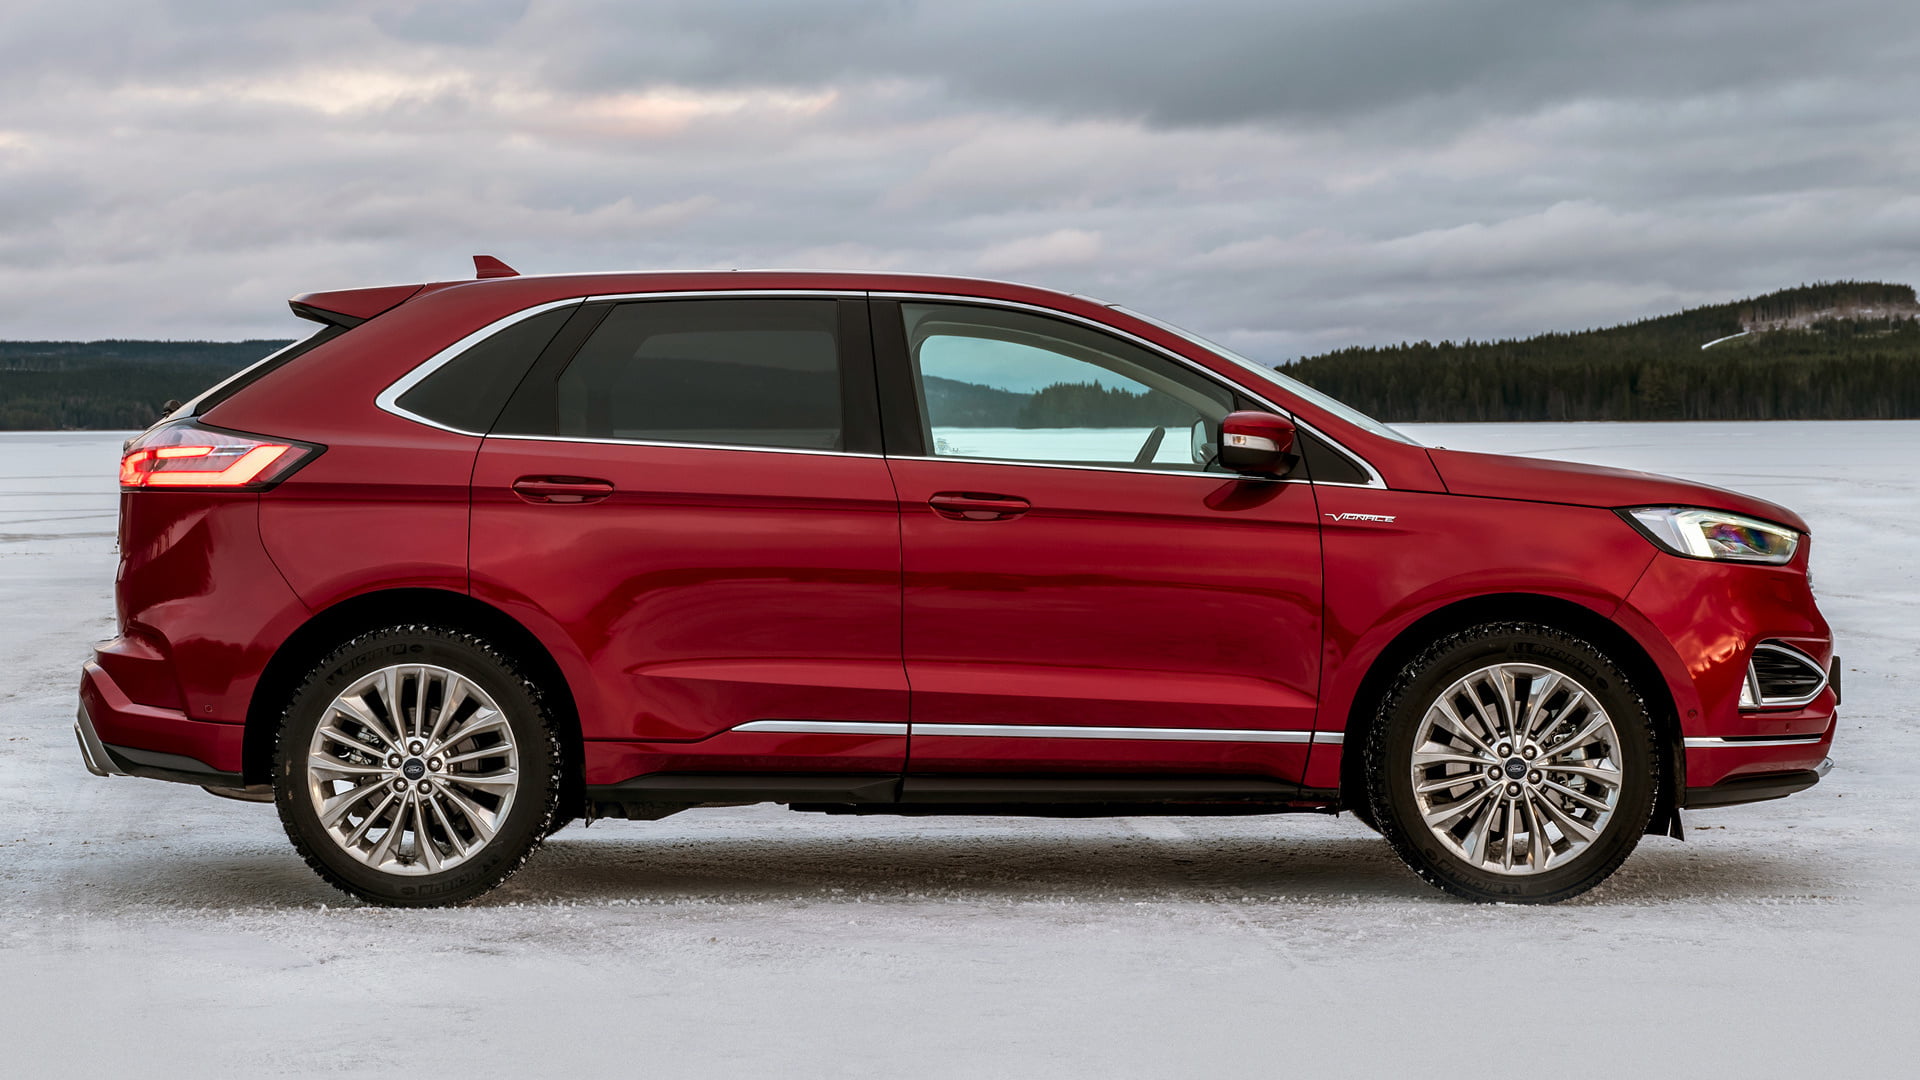 Ford, Ford Edge Vignale, Car, Crossover Car, Mid-Size Car, Red Car